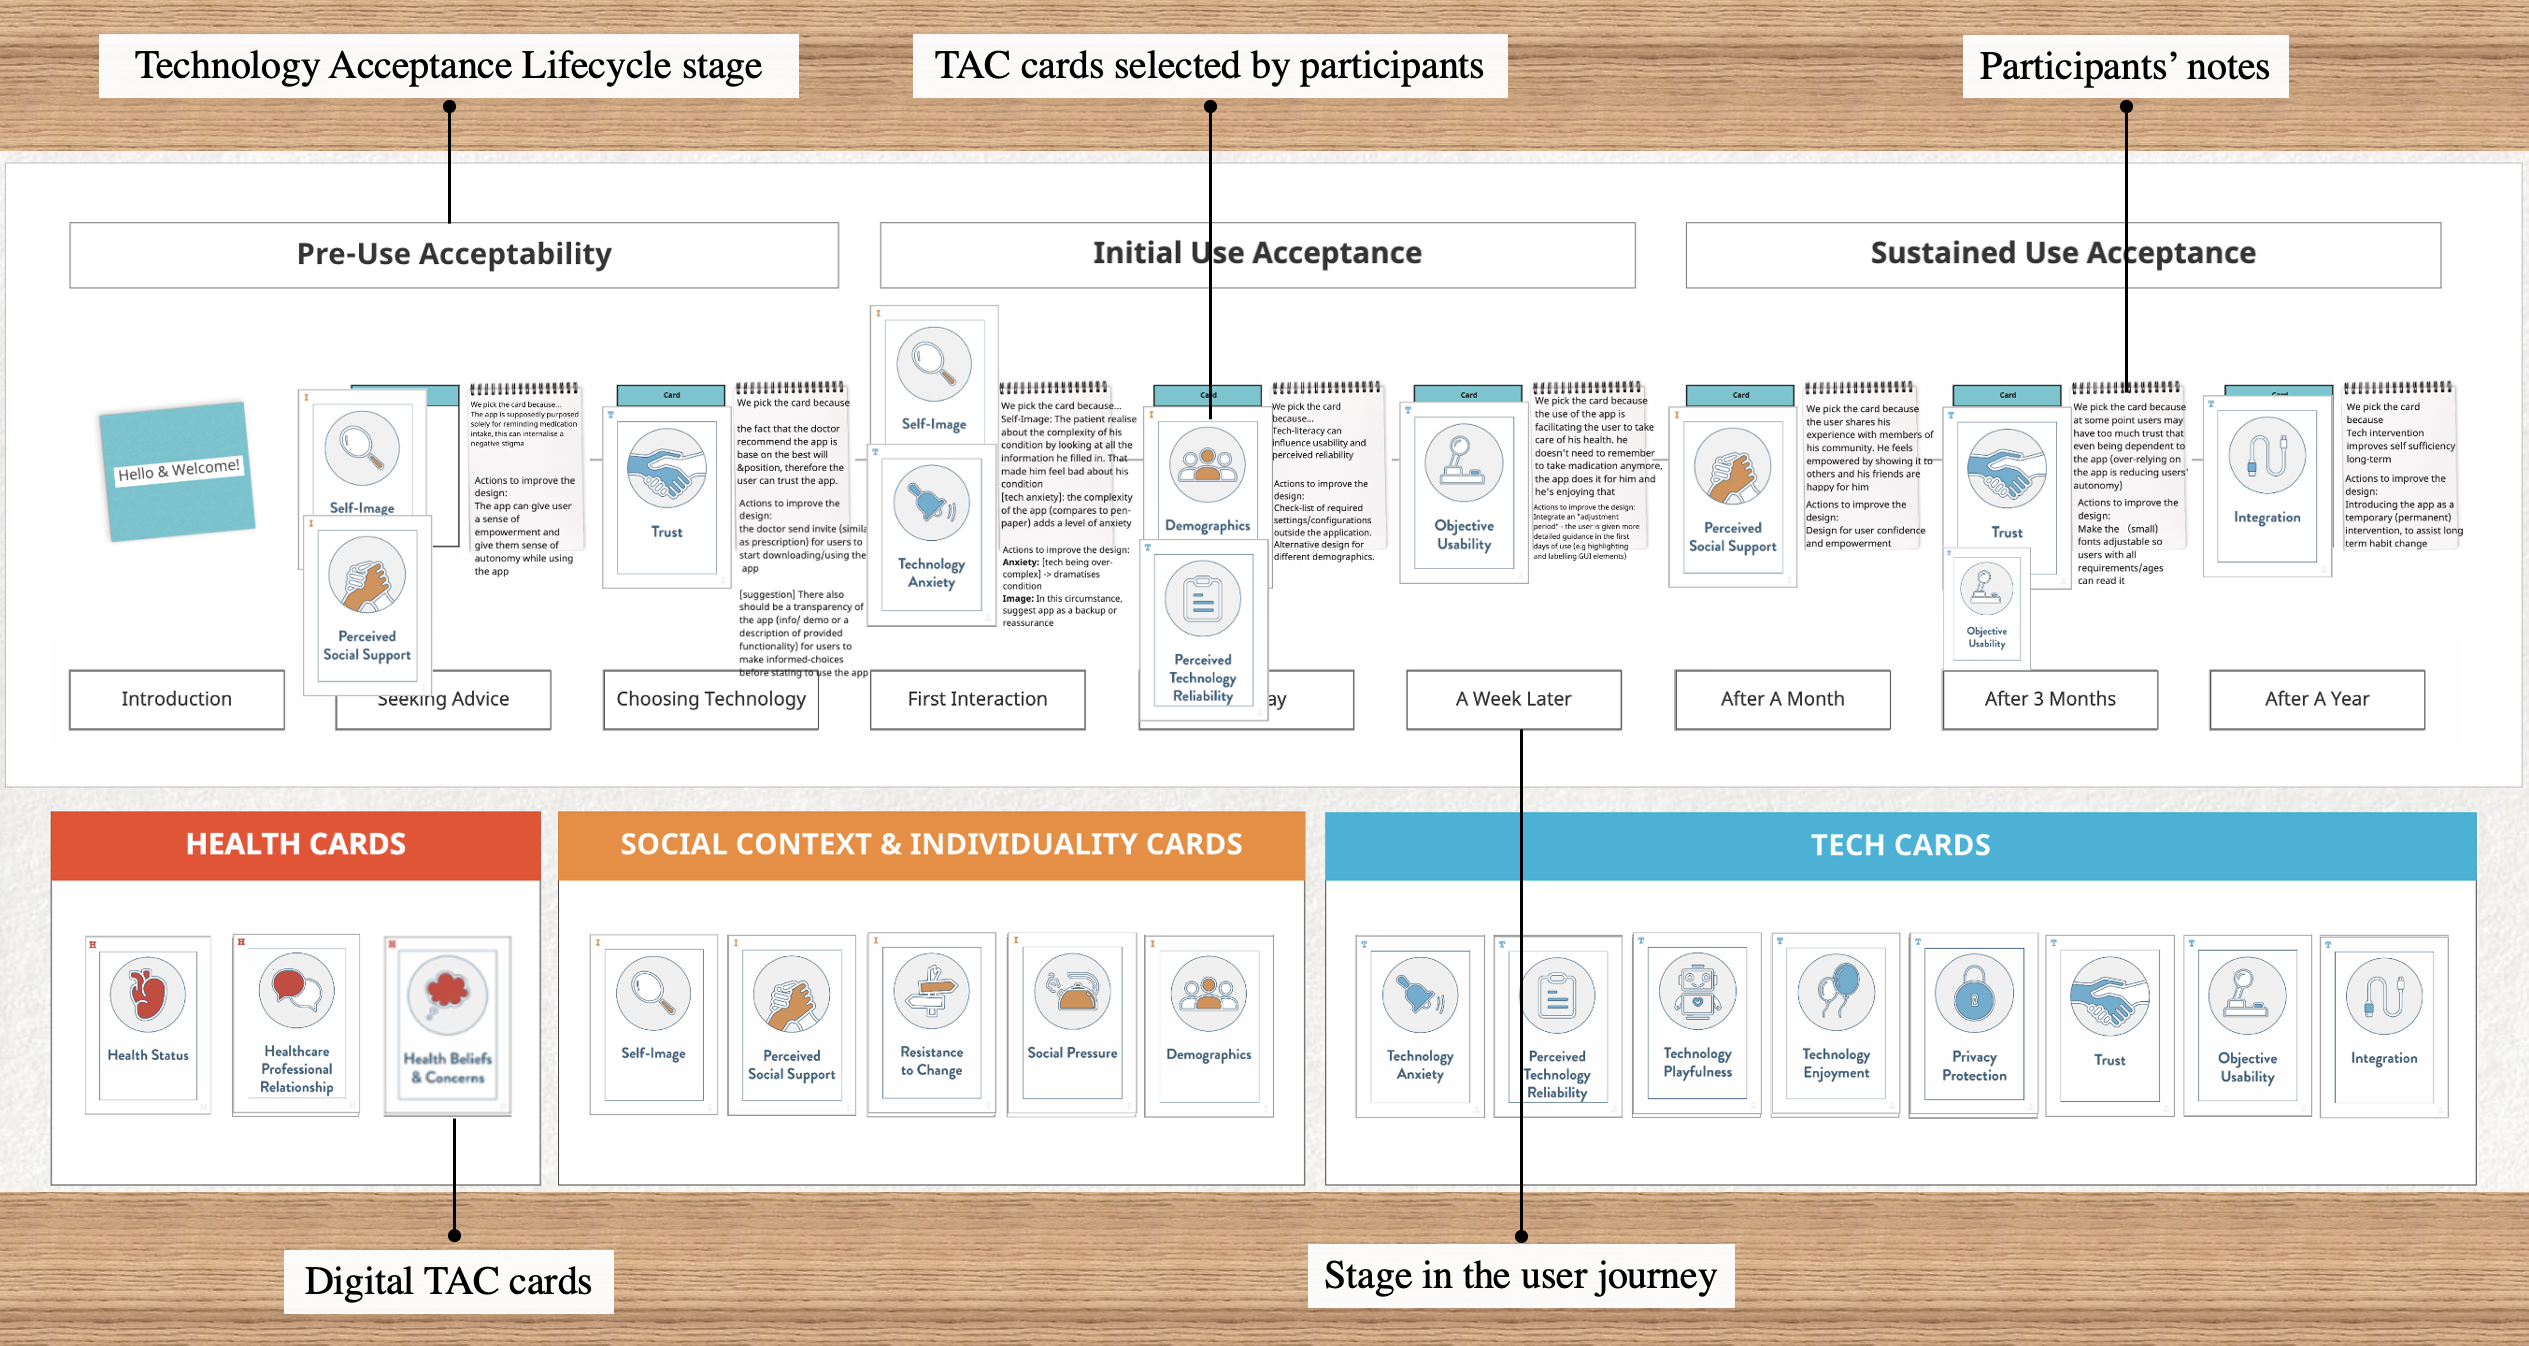 The picture shows for each of the temporal milestones of the user journey, the cards selected by Group 5, together with their notes. The different elements of the picture are captioned.